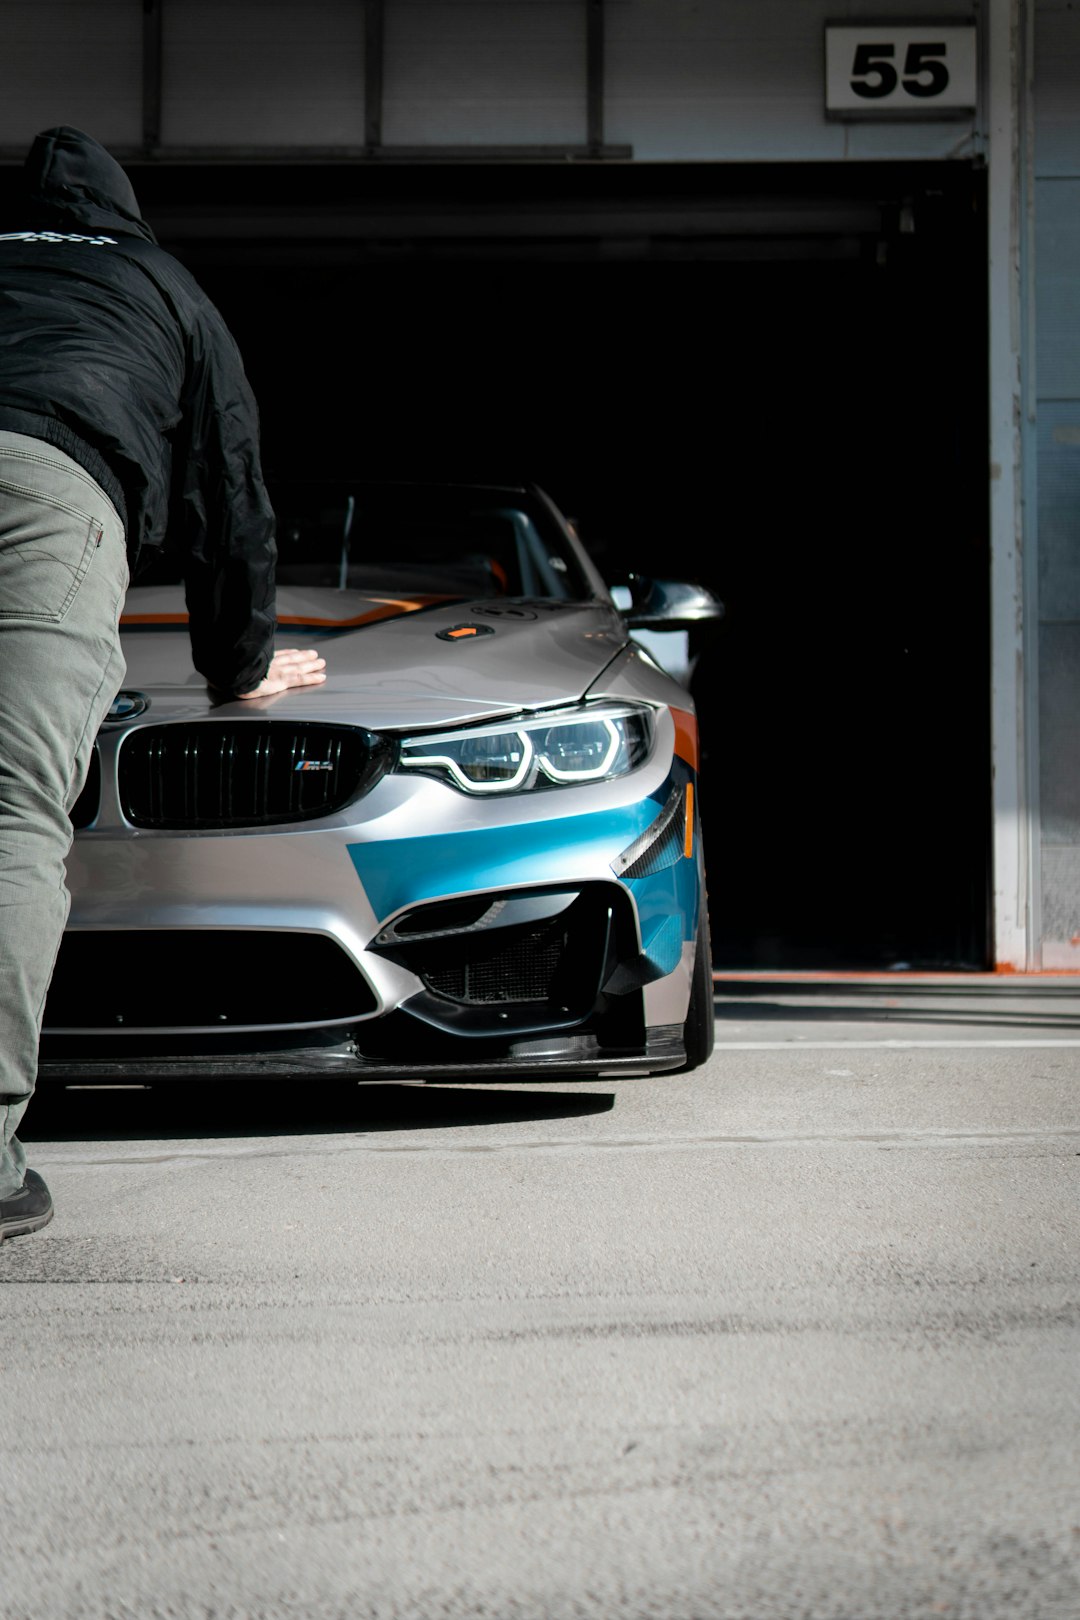 man in black jacket and gray pants standing beside white and black bmw car